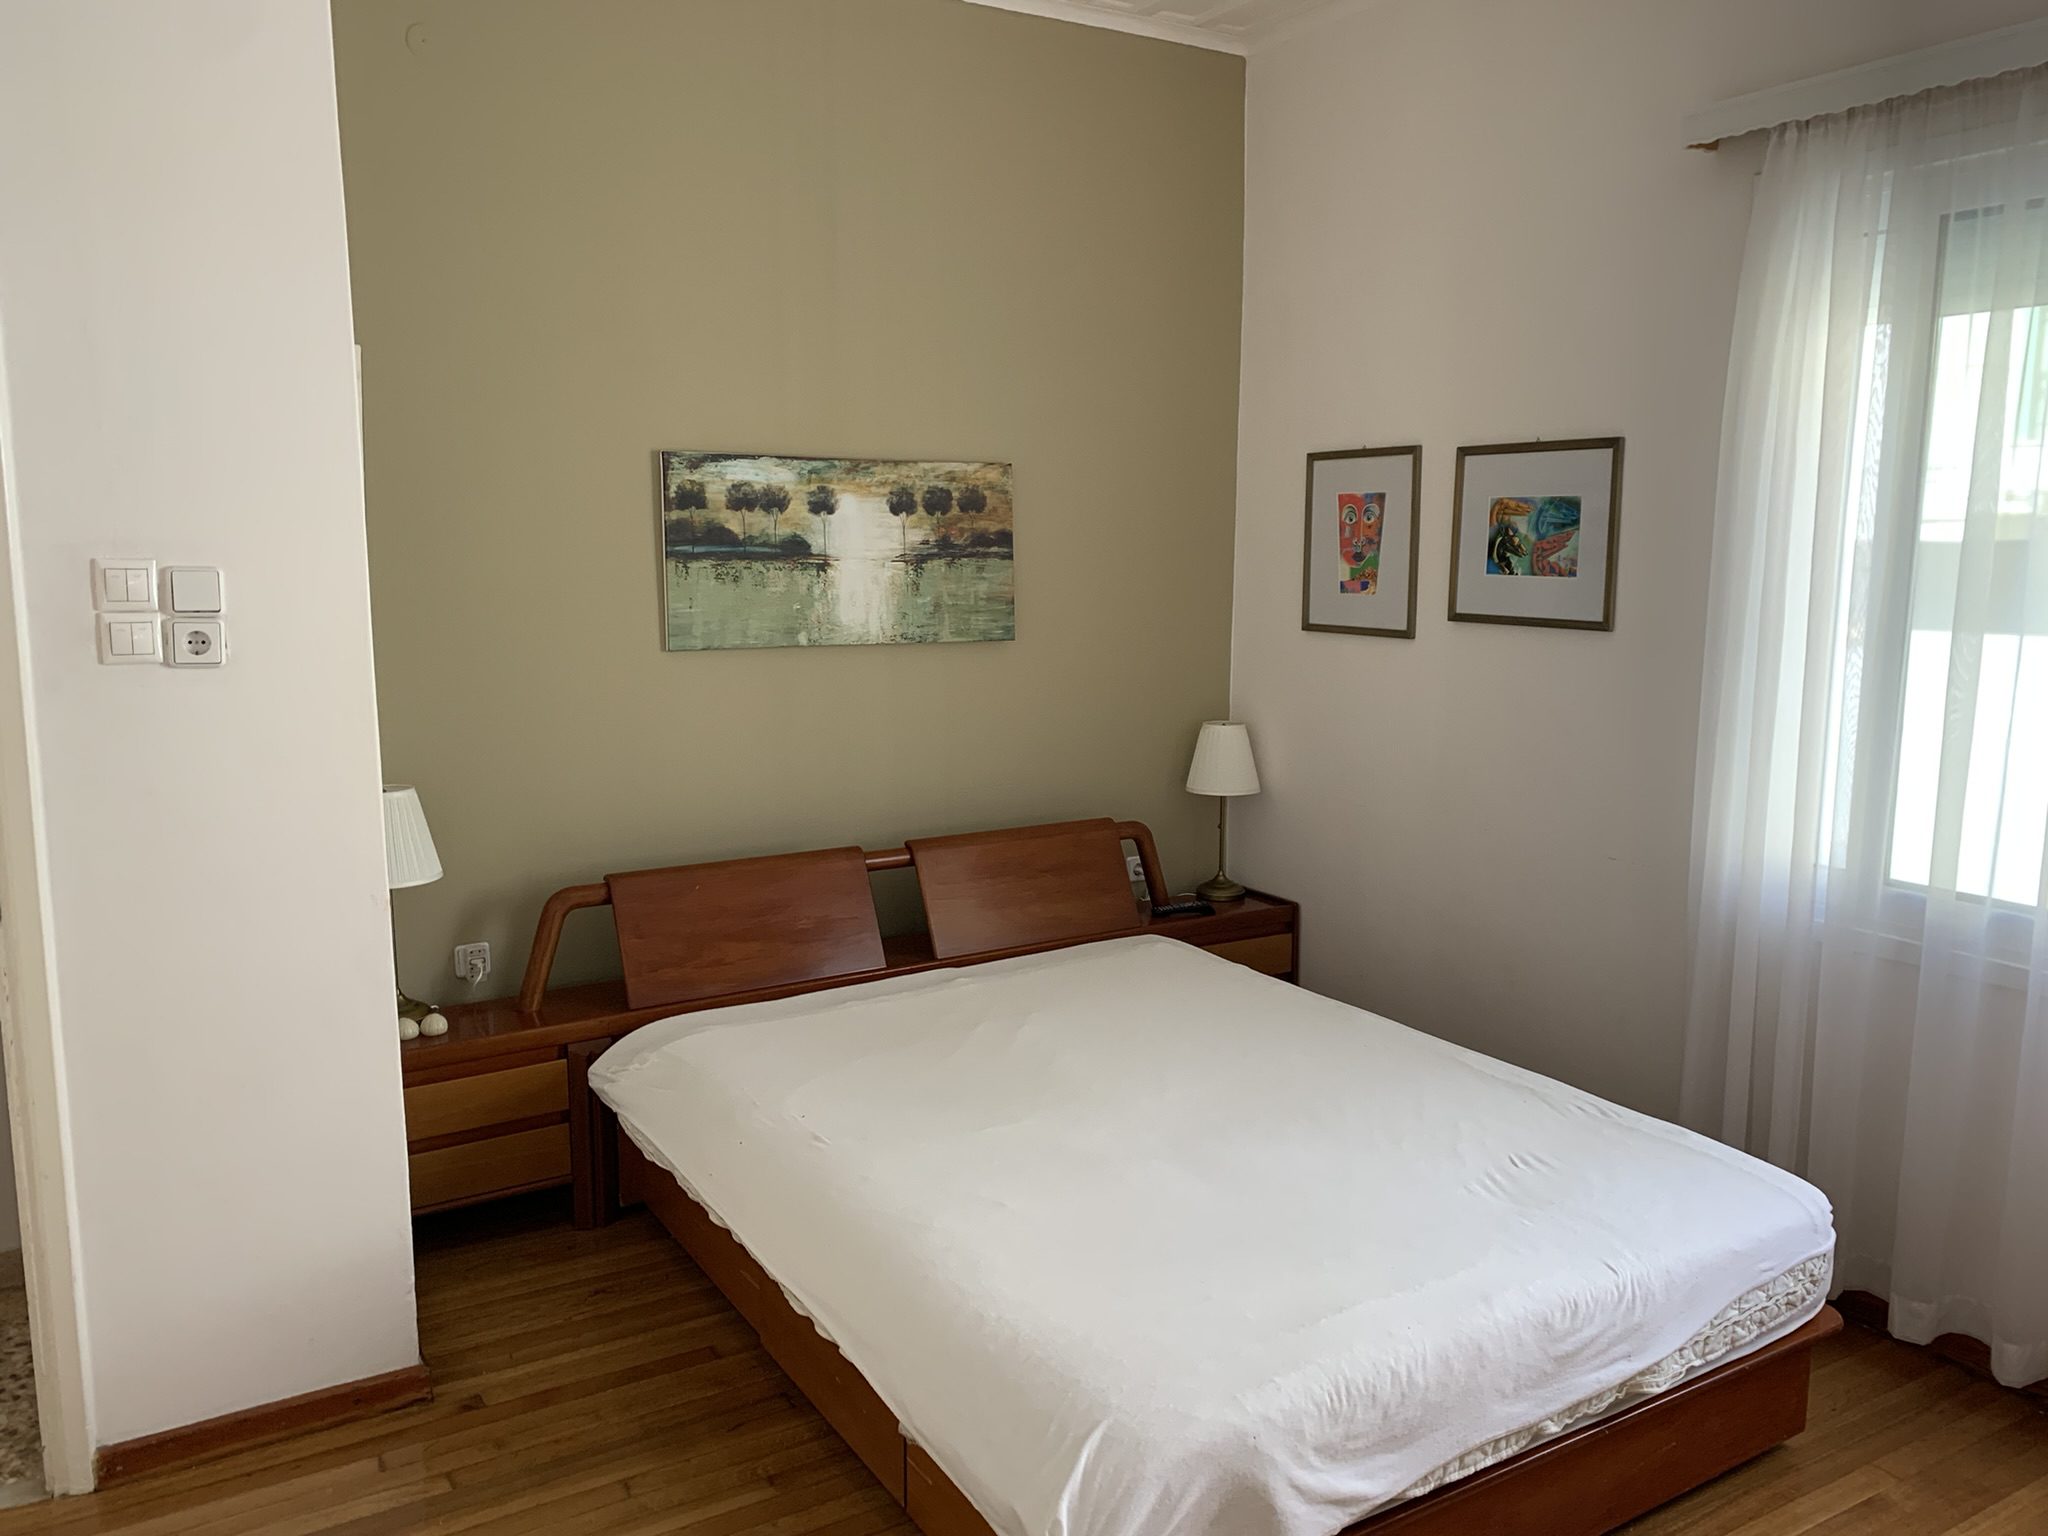 Bedroom of house for rent in Ithaca Greece, Vathi